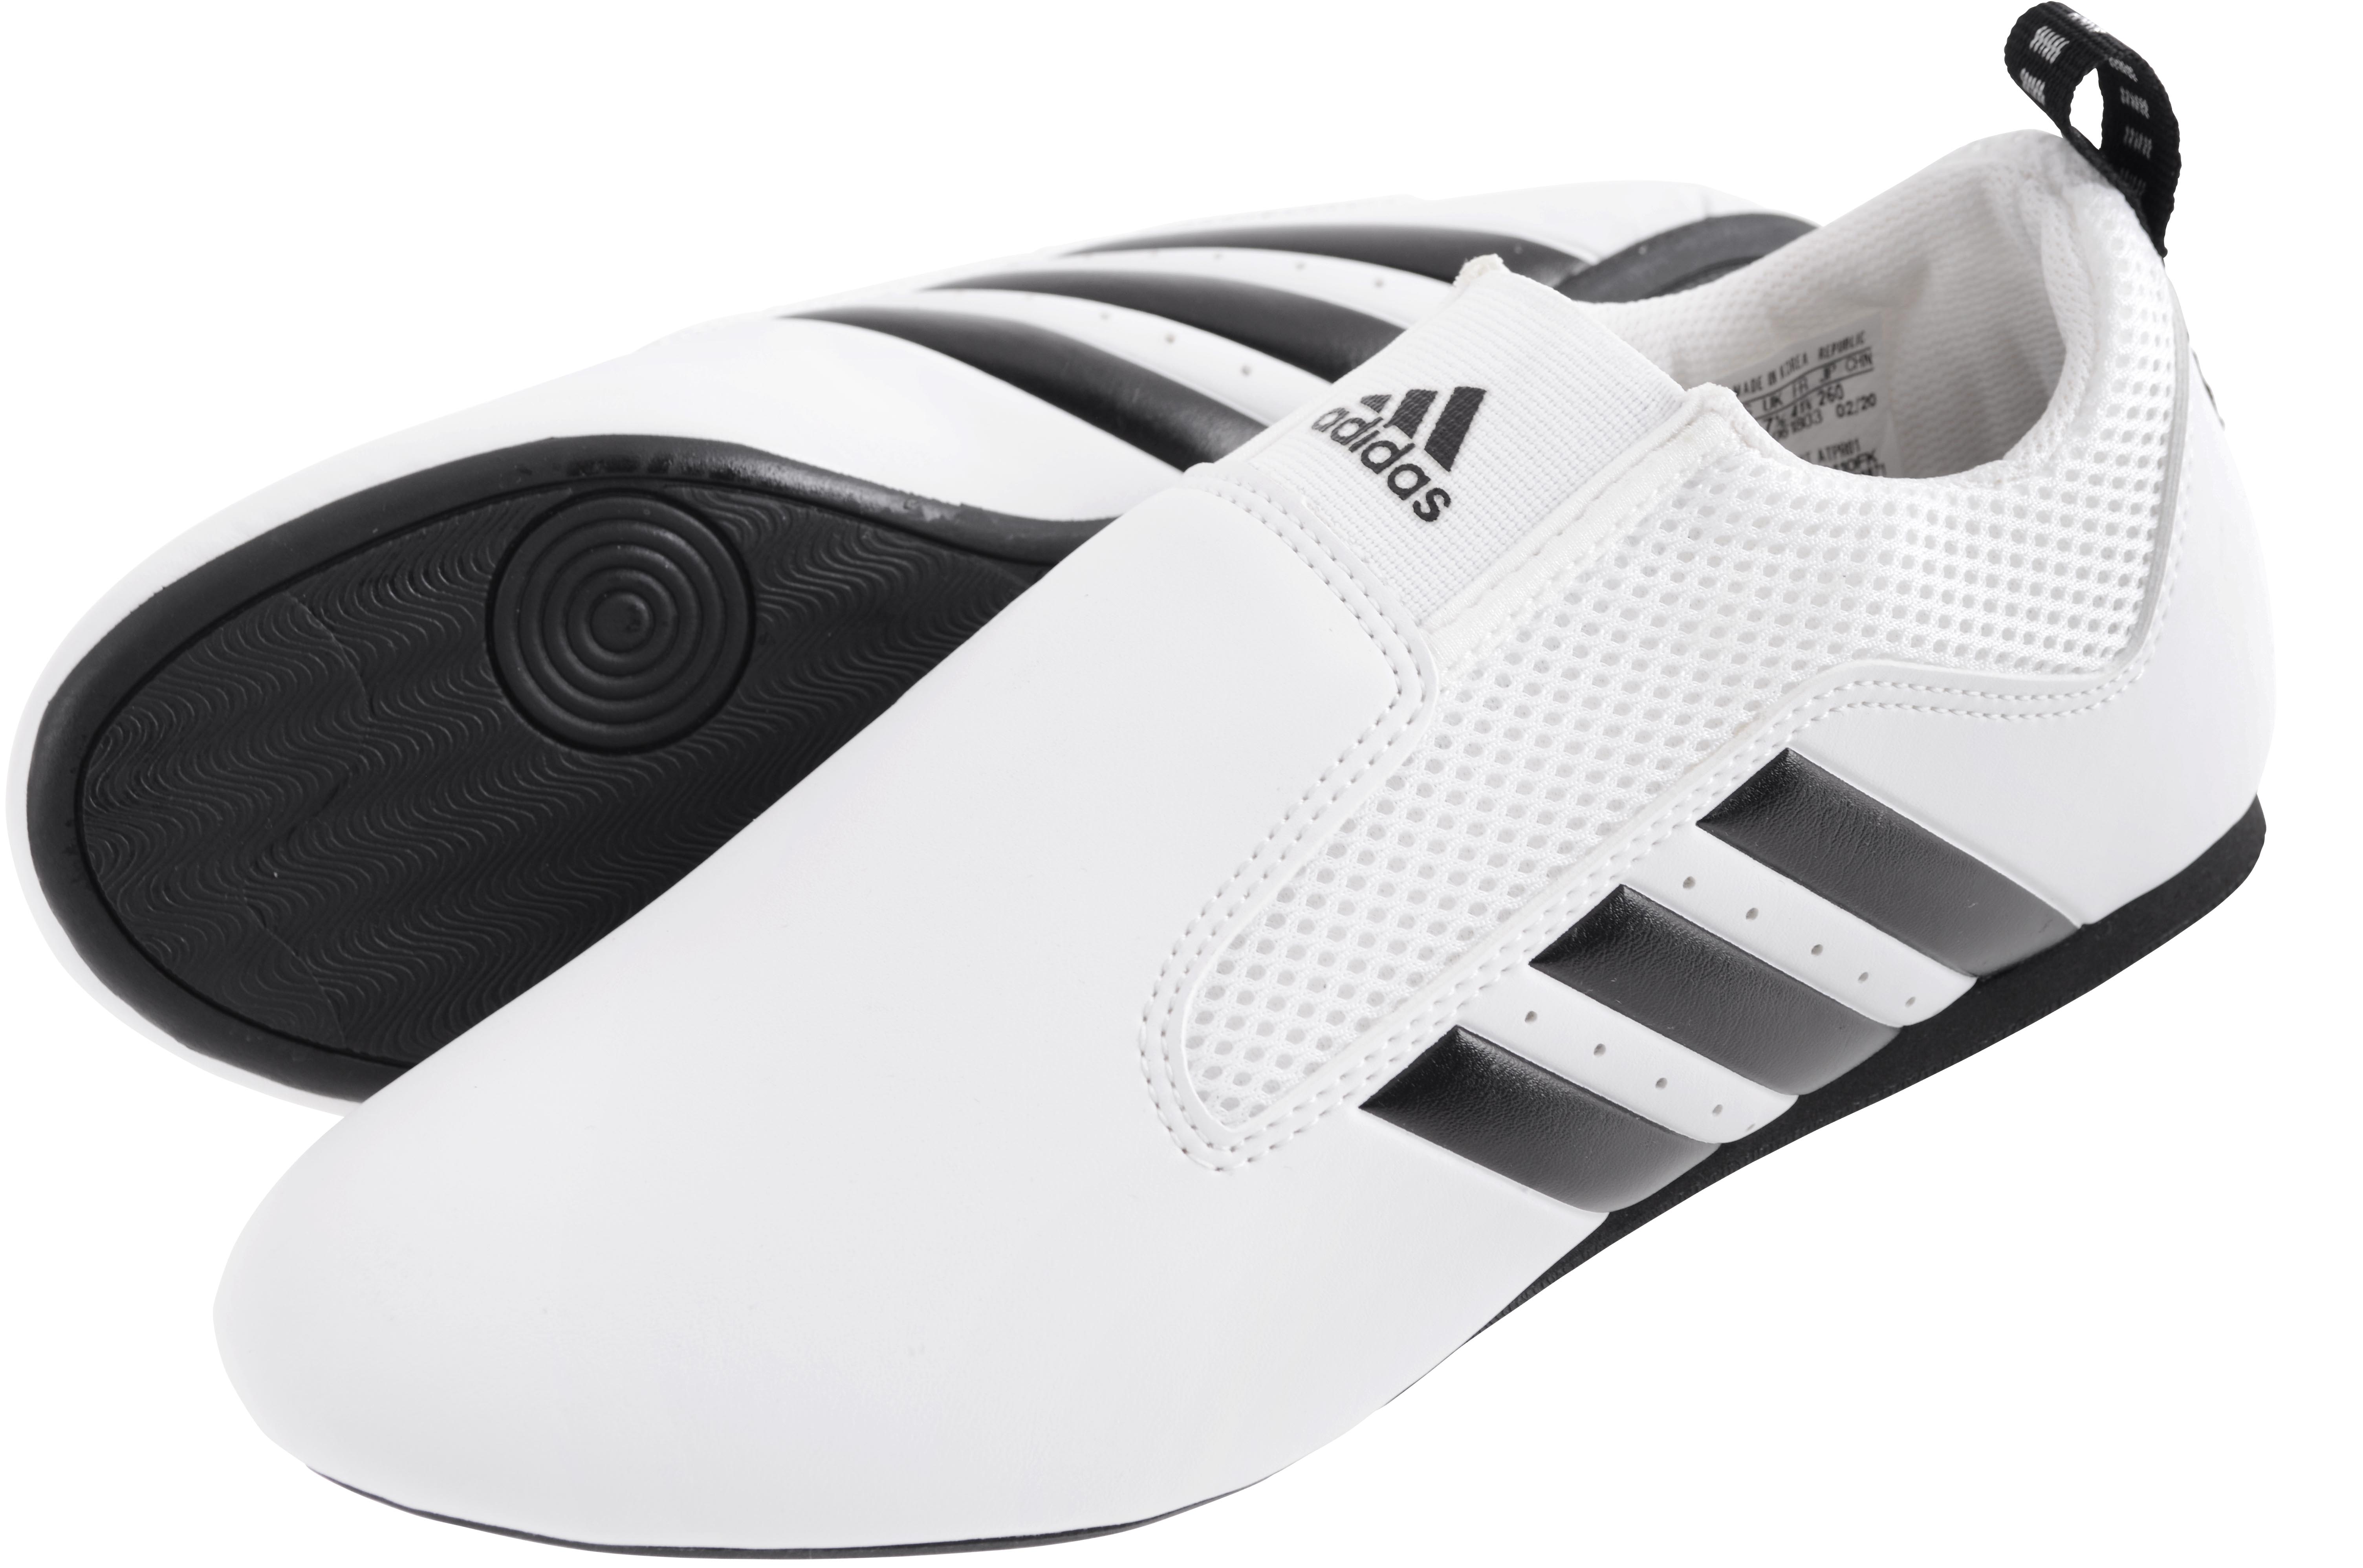 15 idées de Chaussures adidas  chaussures adidas, adidas, chaussures pour  hommes